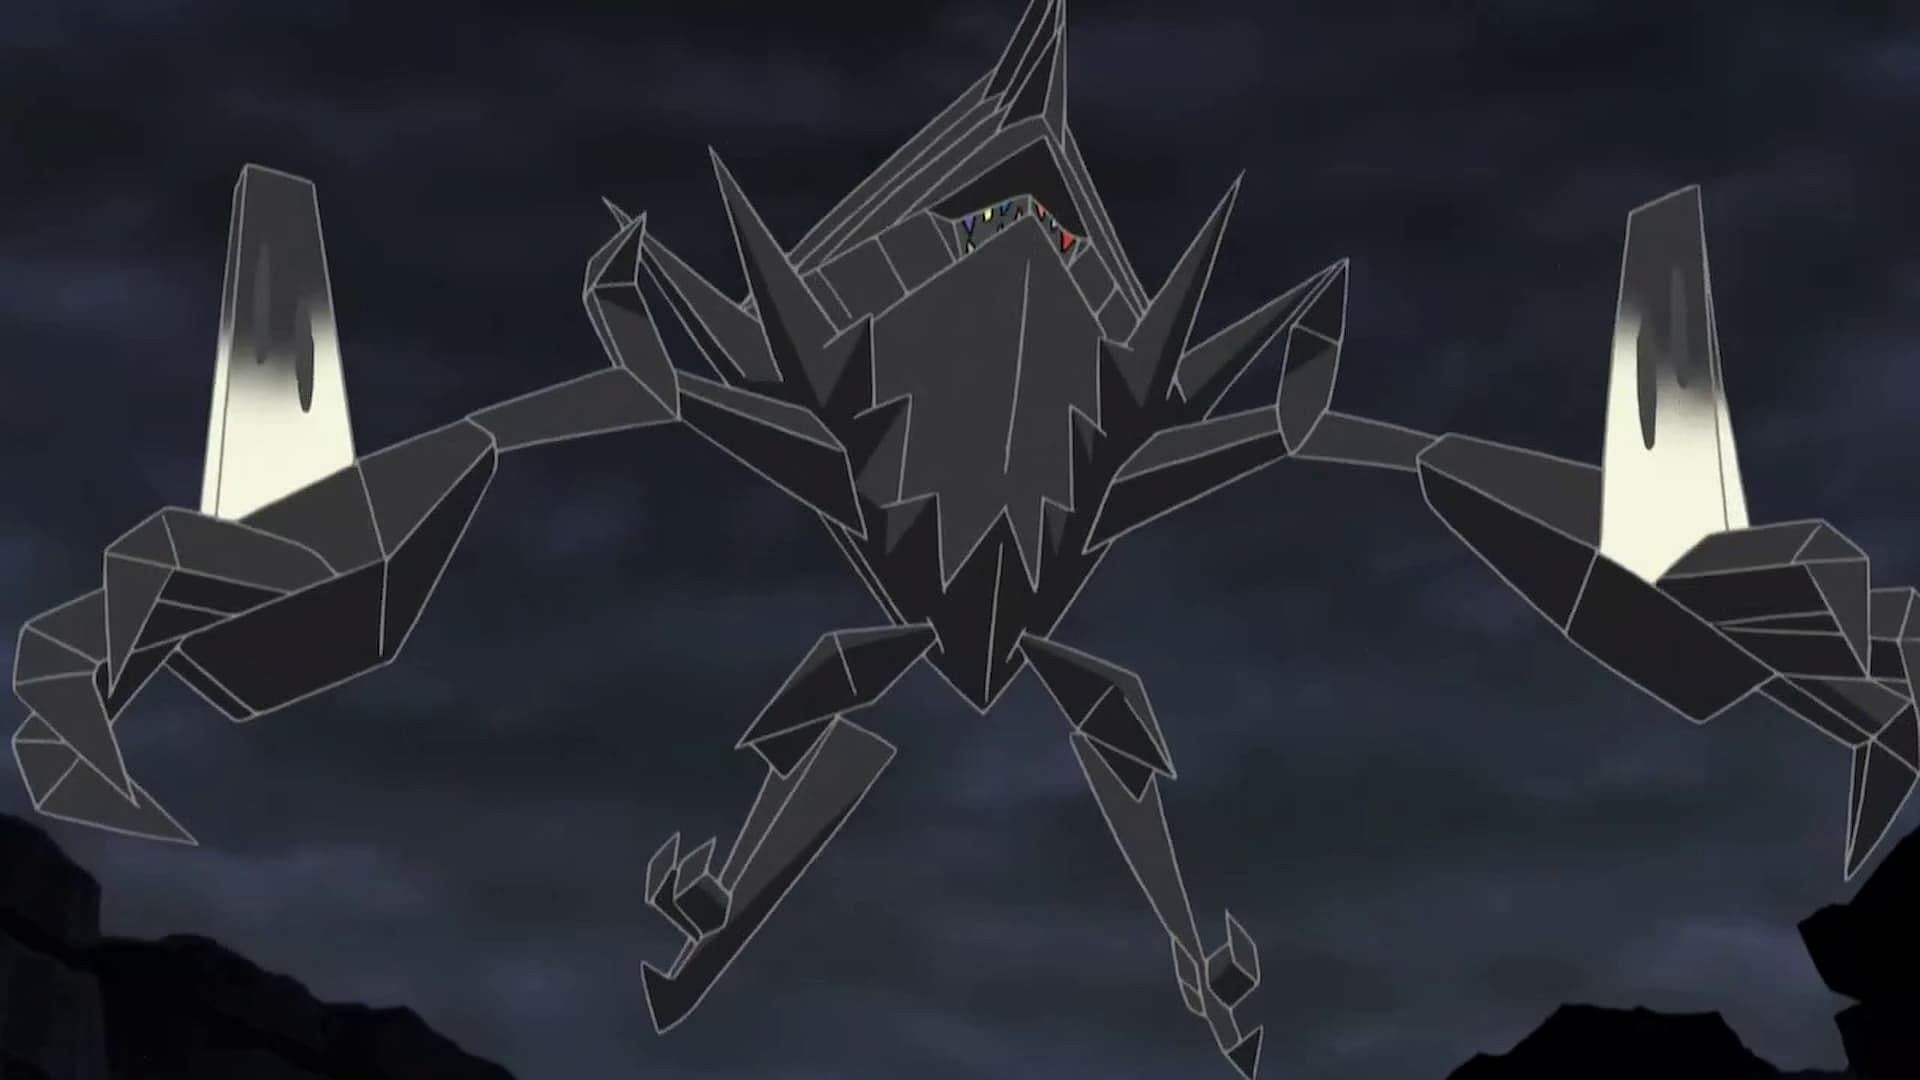 The debut of Necrozma is the main spotlight of the event (Image via The Pokemon Company)